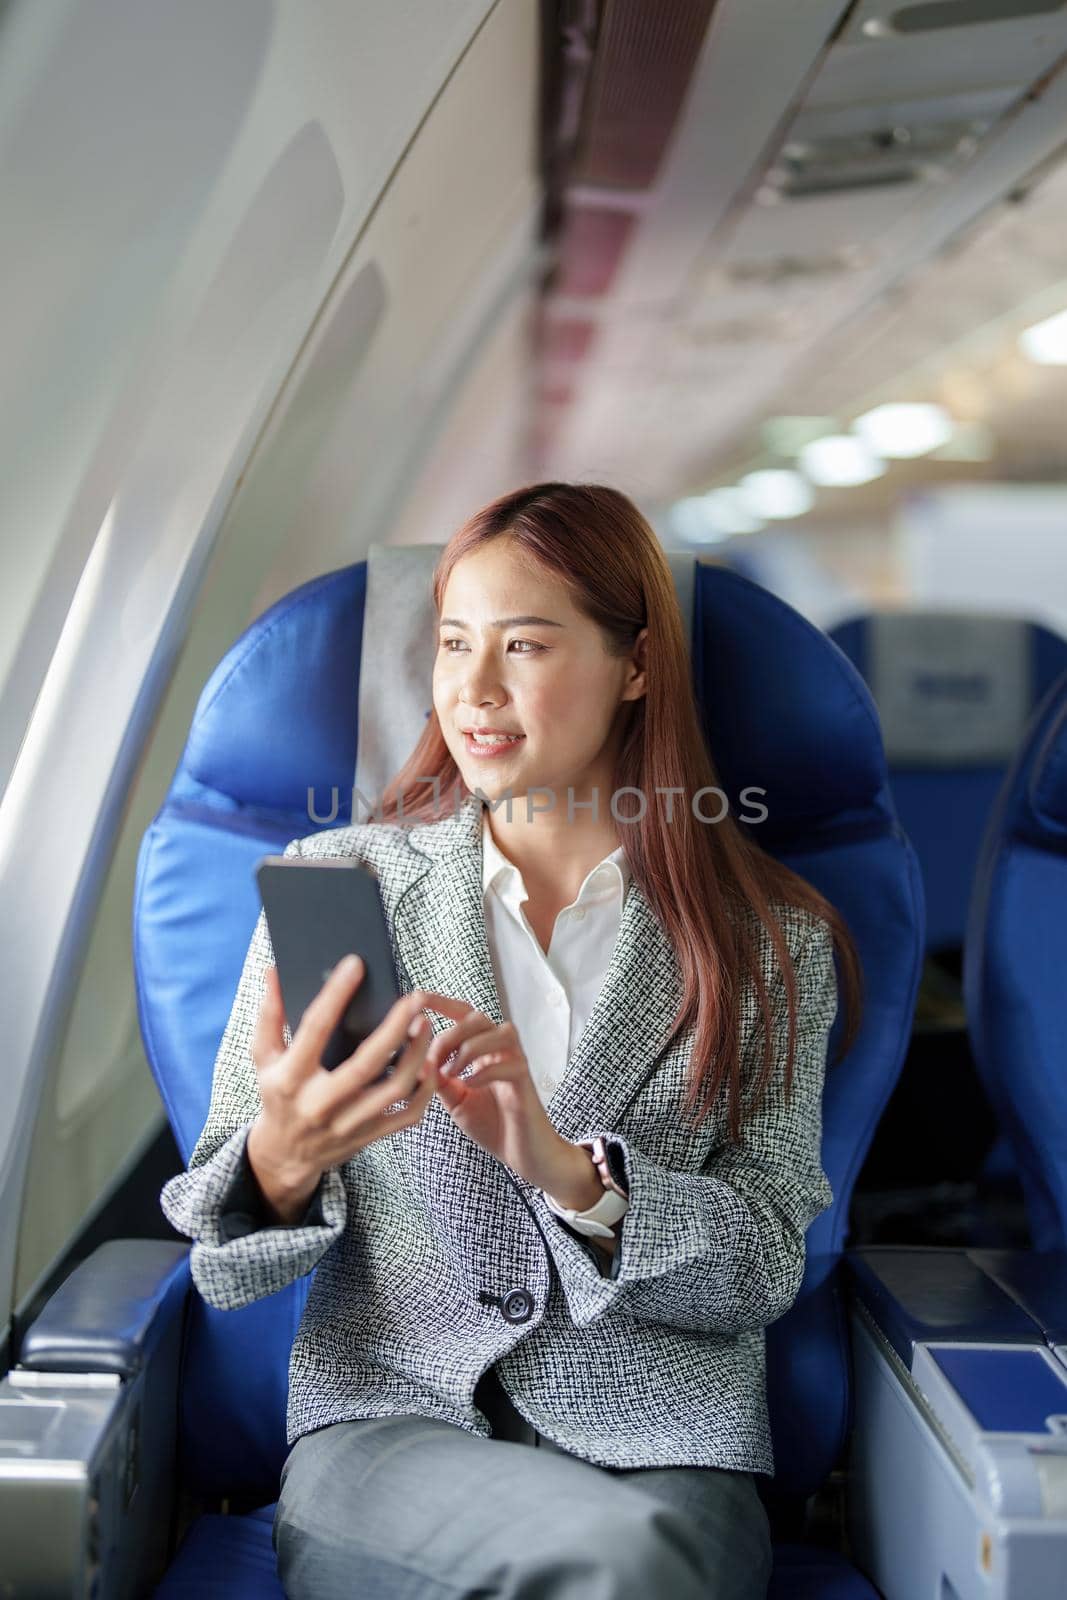 A portrait of a smiling Asian businesswoman using her phone while on a plane by Manastrong